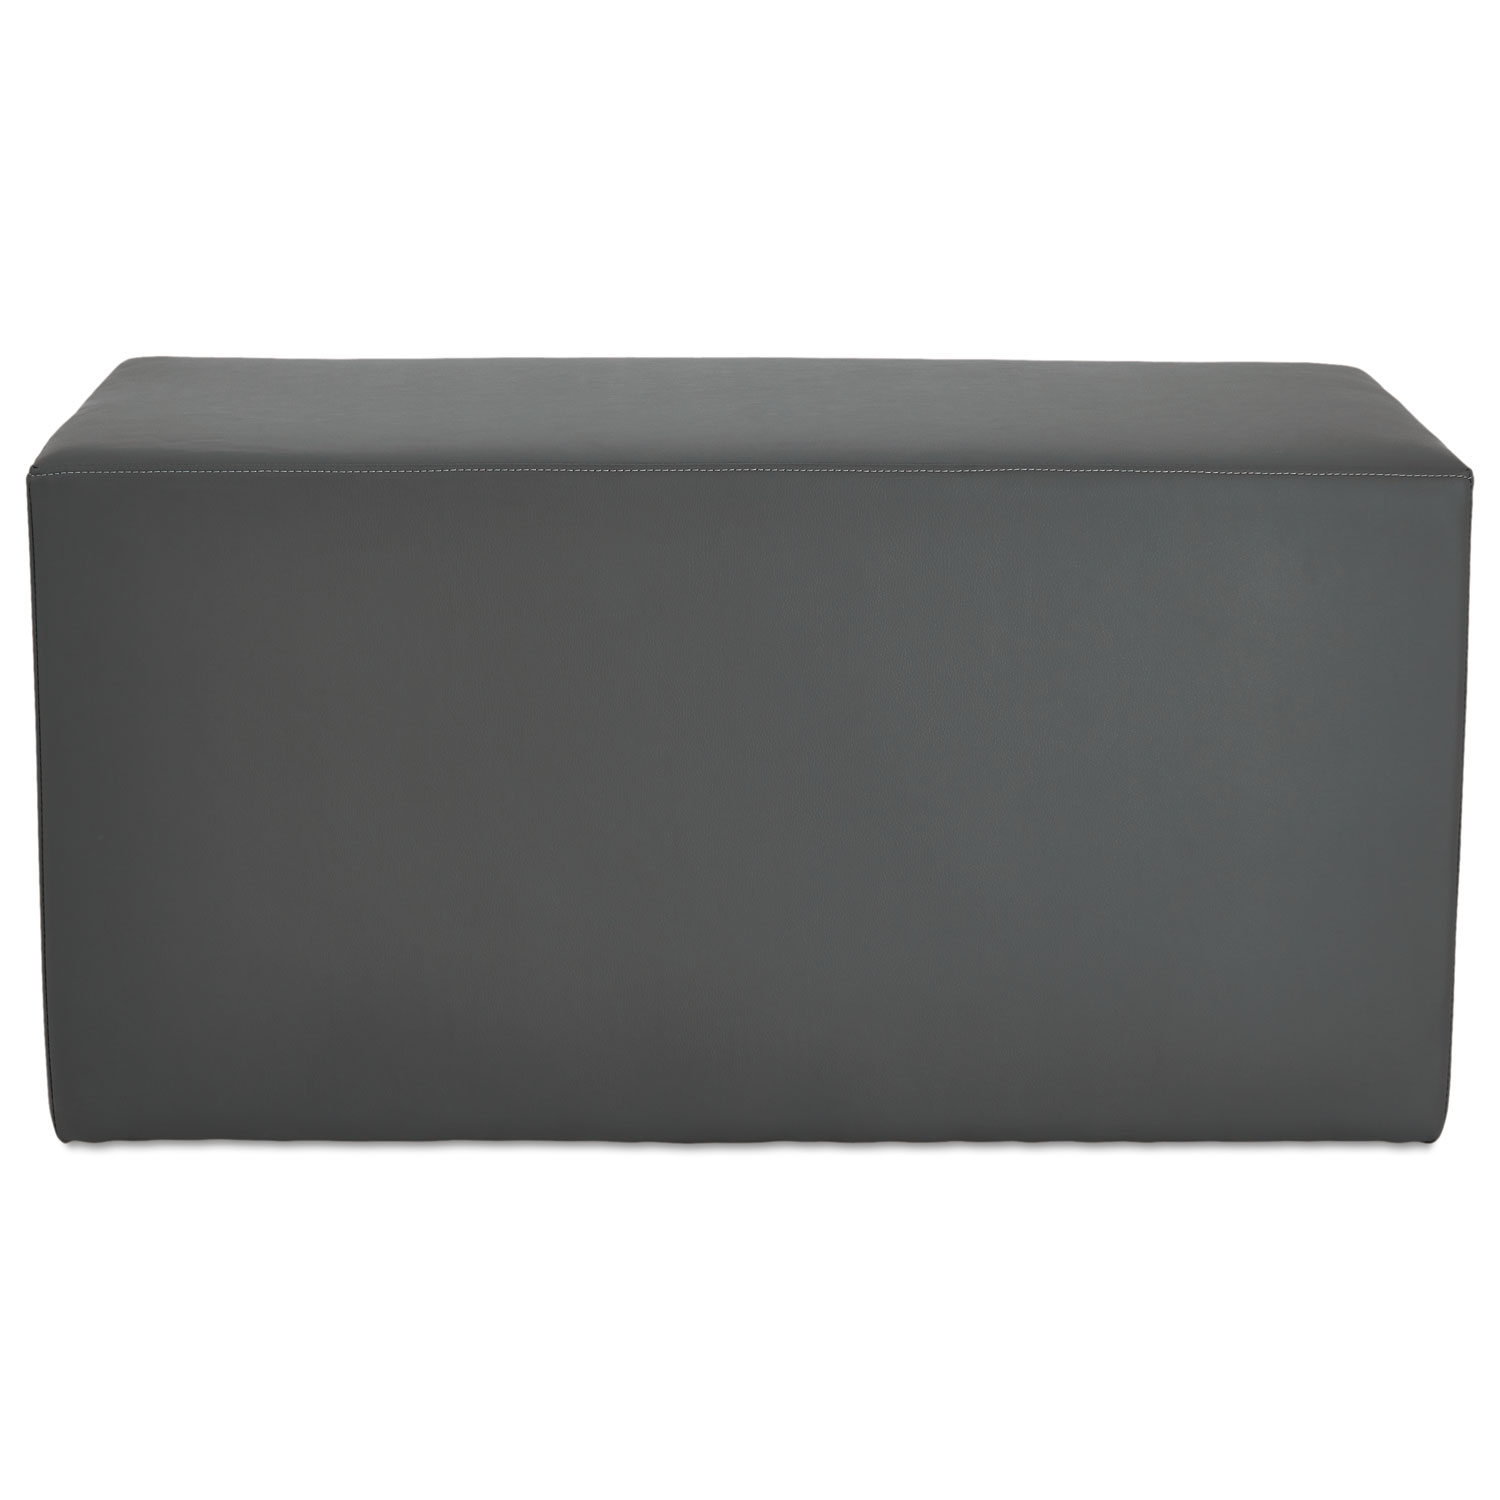 Alera WE Series Collaboration Seating, Rectangle Bench, 36 x 18 x 18, Slate